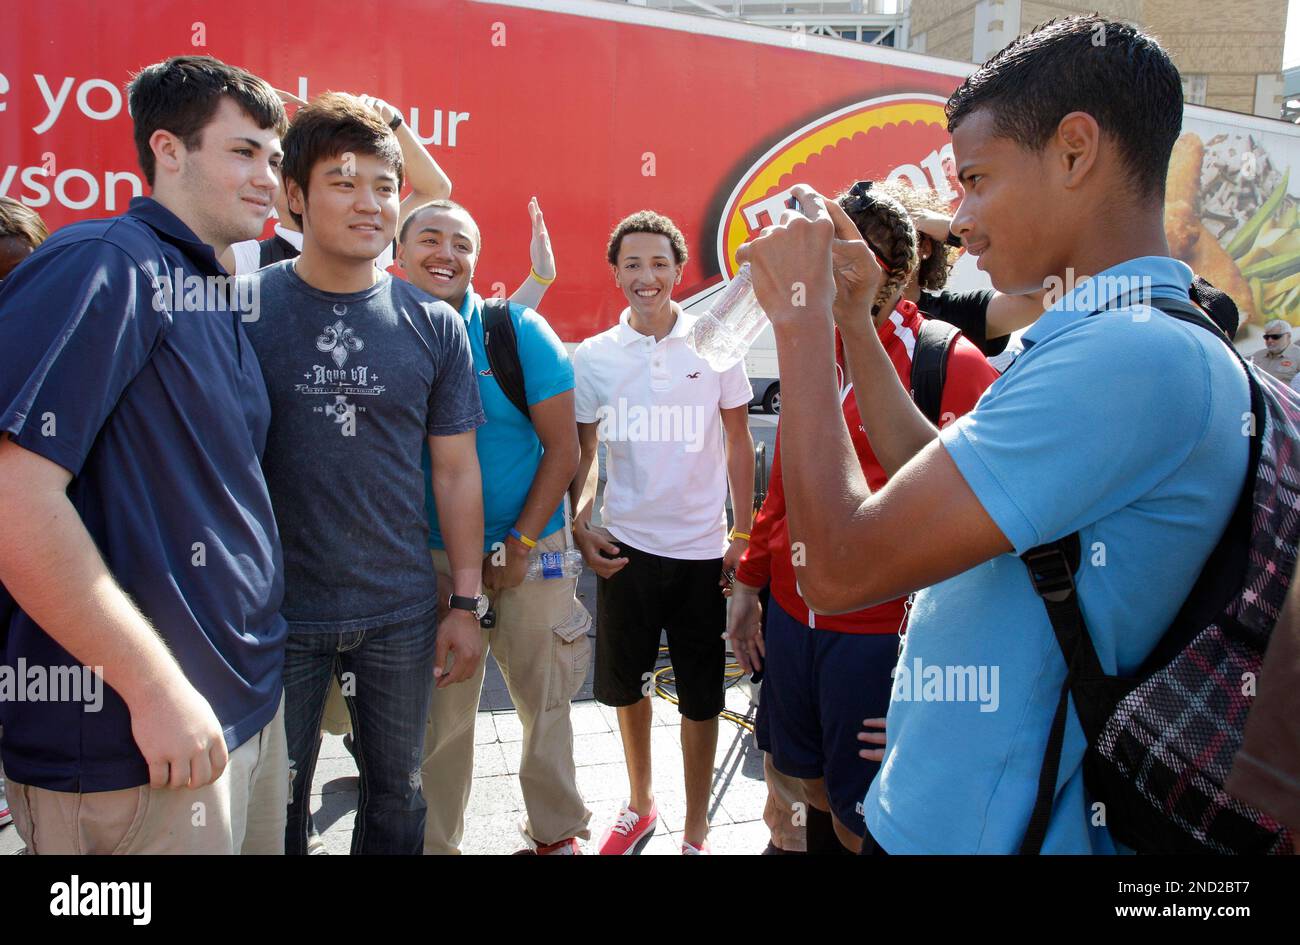 Jamsel Melendez, right, takes a picture of some other children